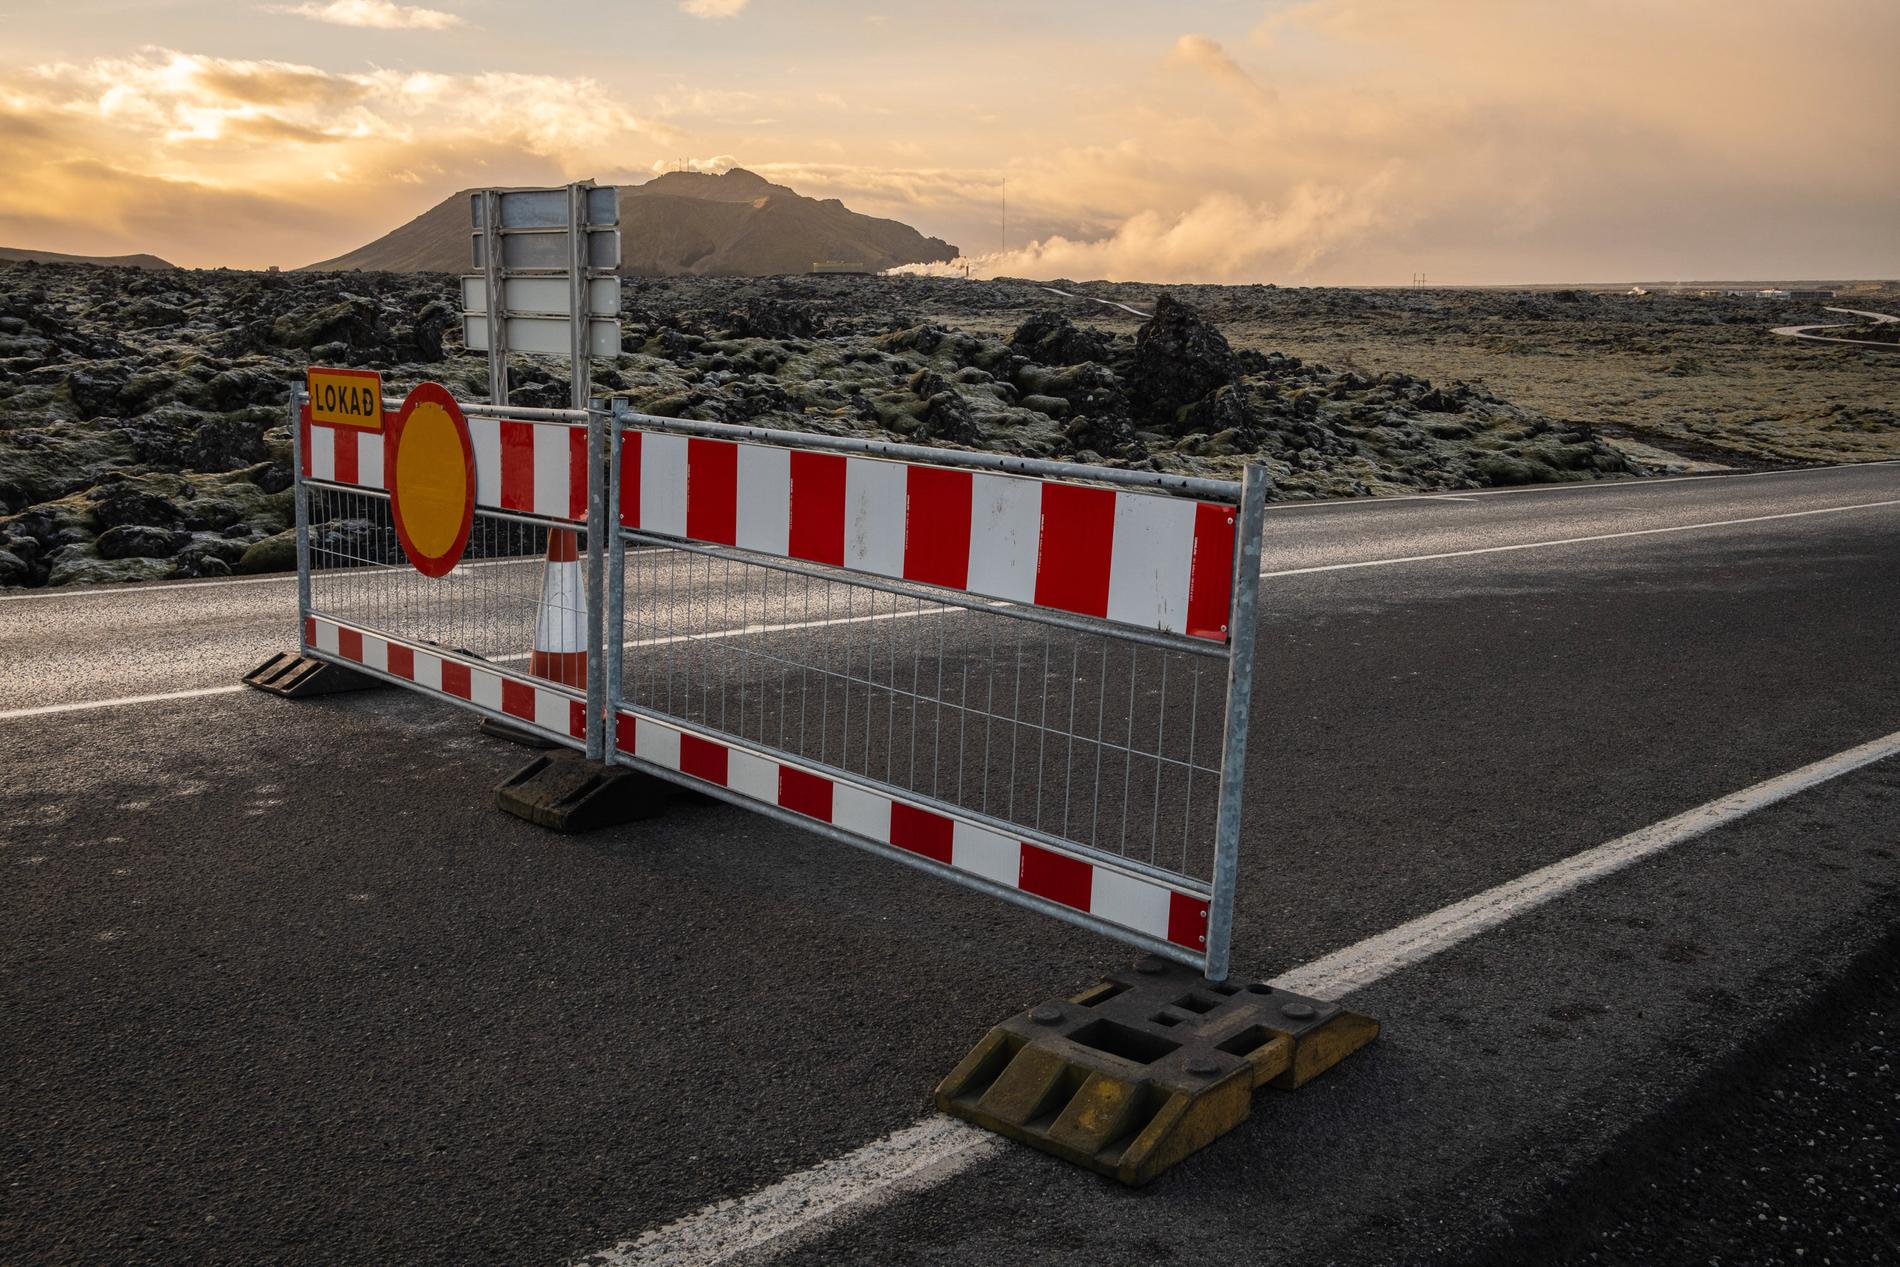 CLOSED ROADS: The road to the Blue Lagoon has been closed as a result of the situation in the Grindavik area. 